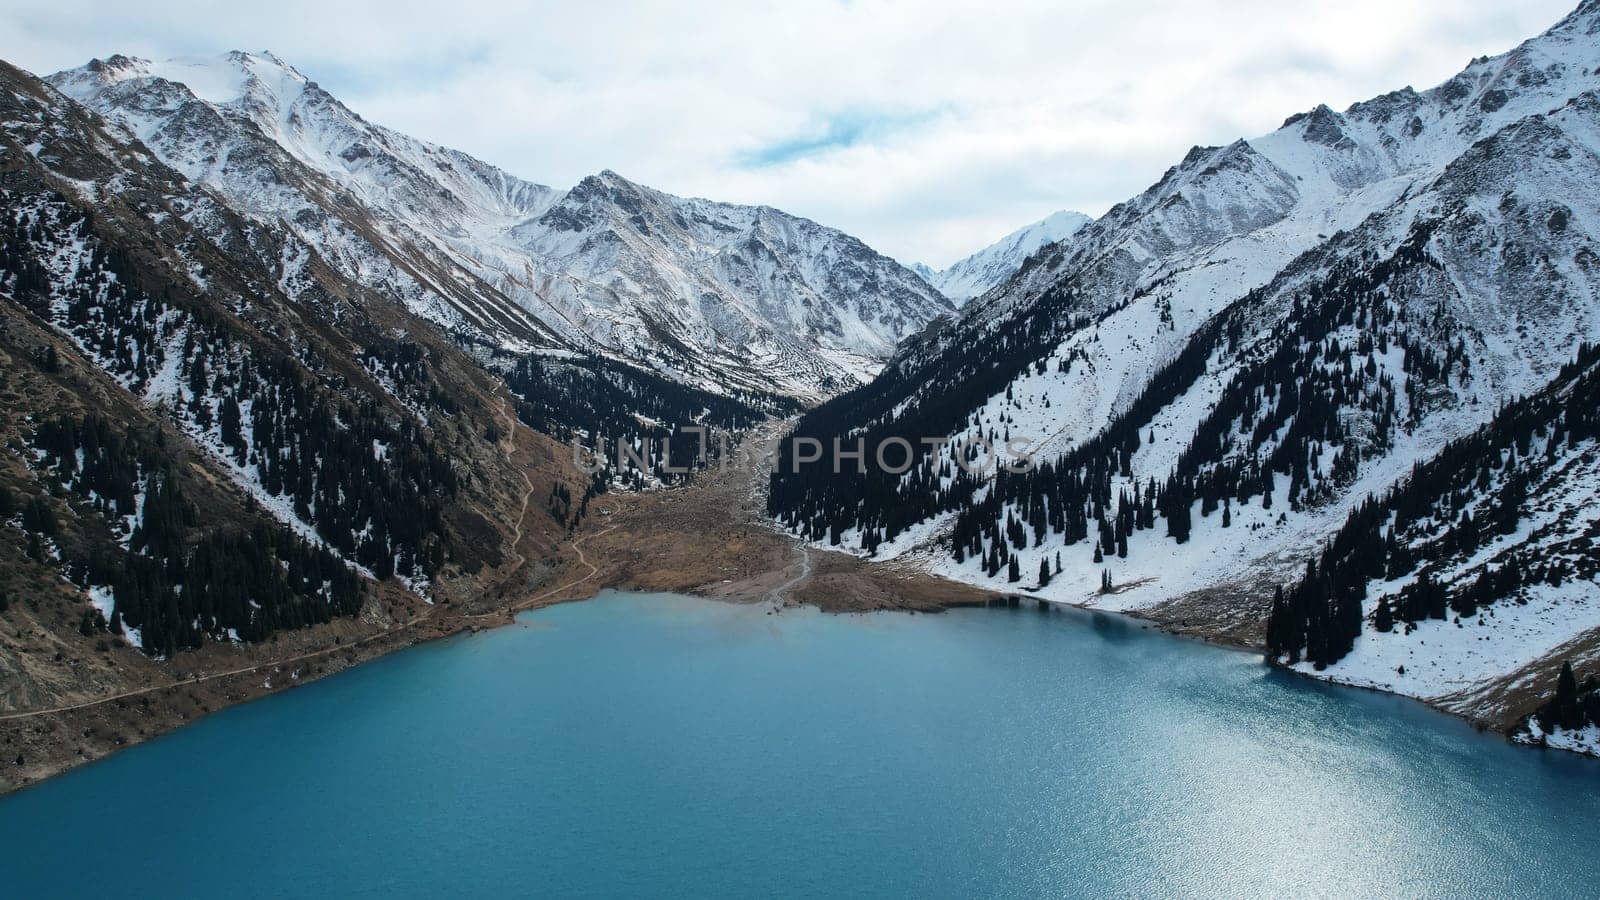 Lake in the mountains with turquoise blue water by Passcal